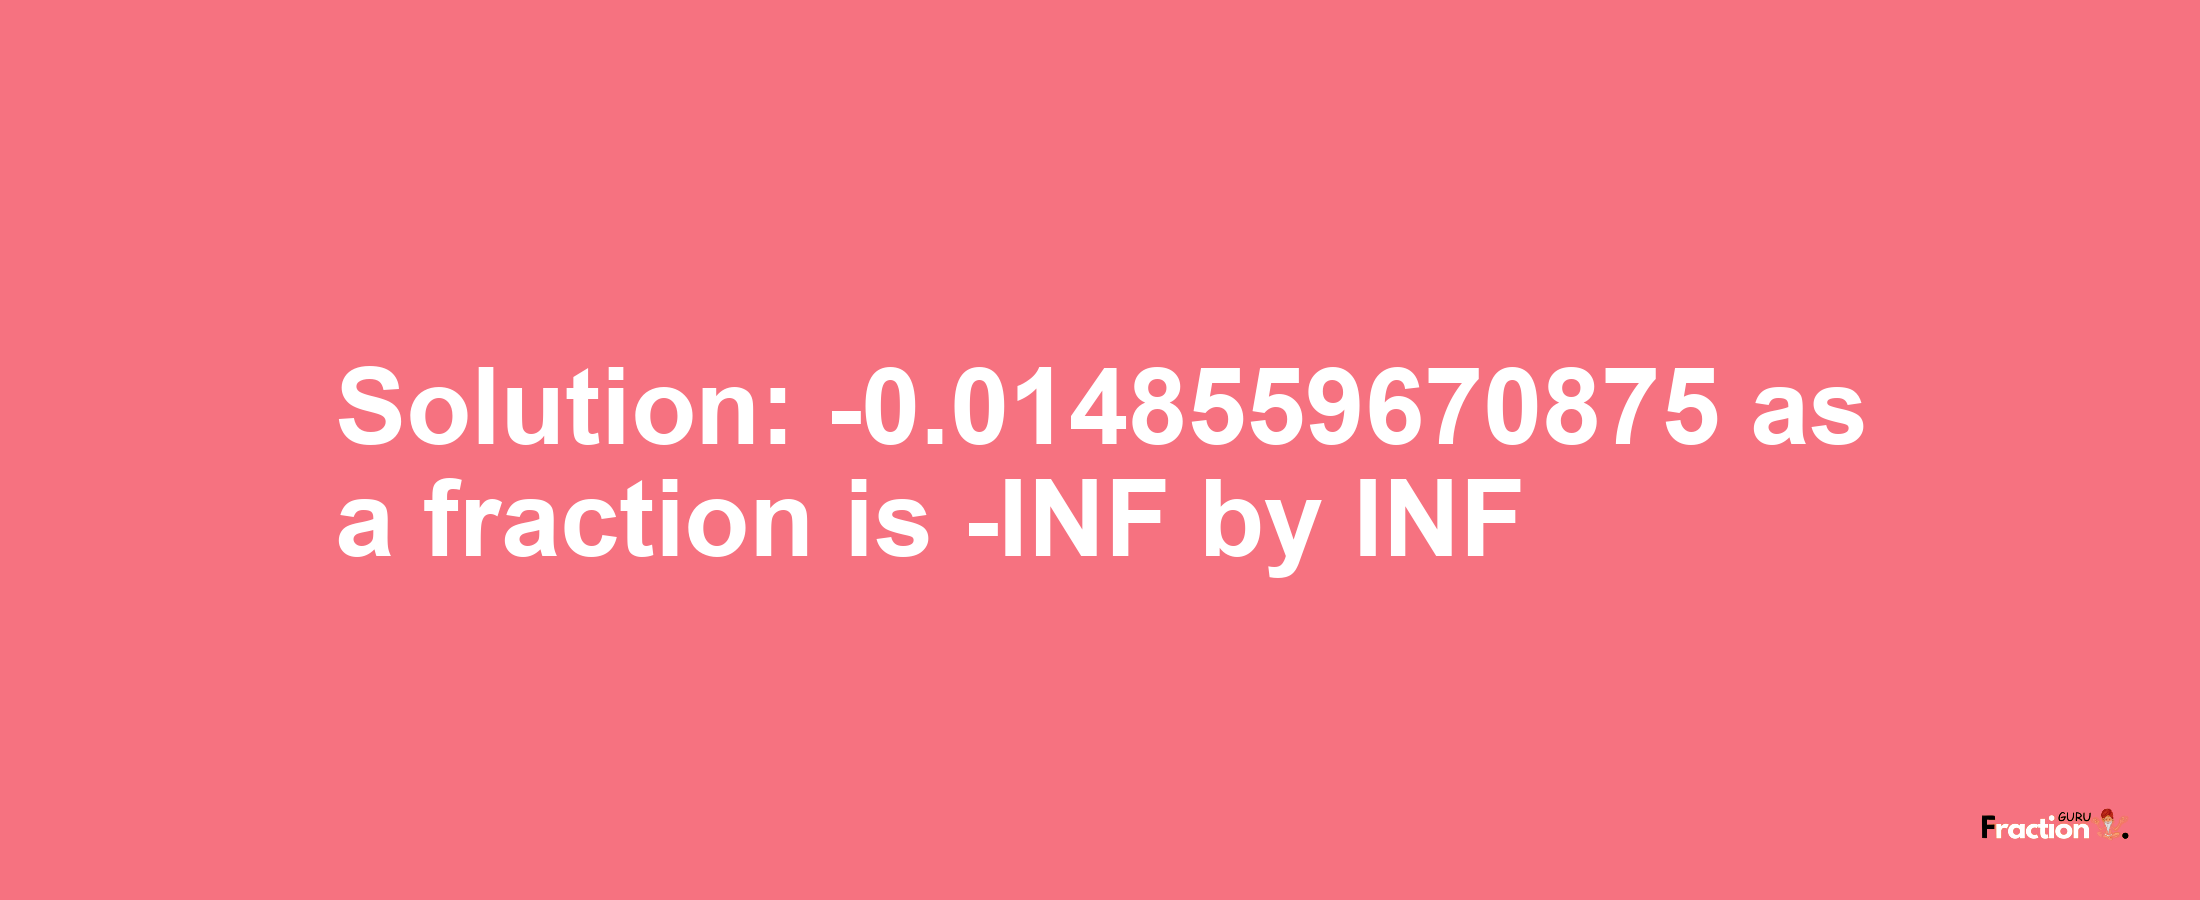 Solution:-0.0148559670875 as a fraction is -INF/INF